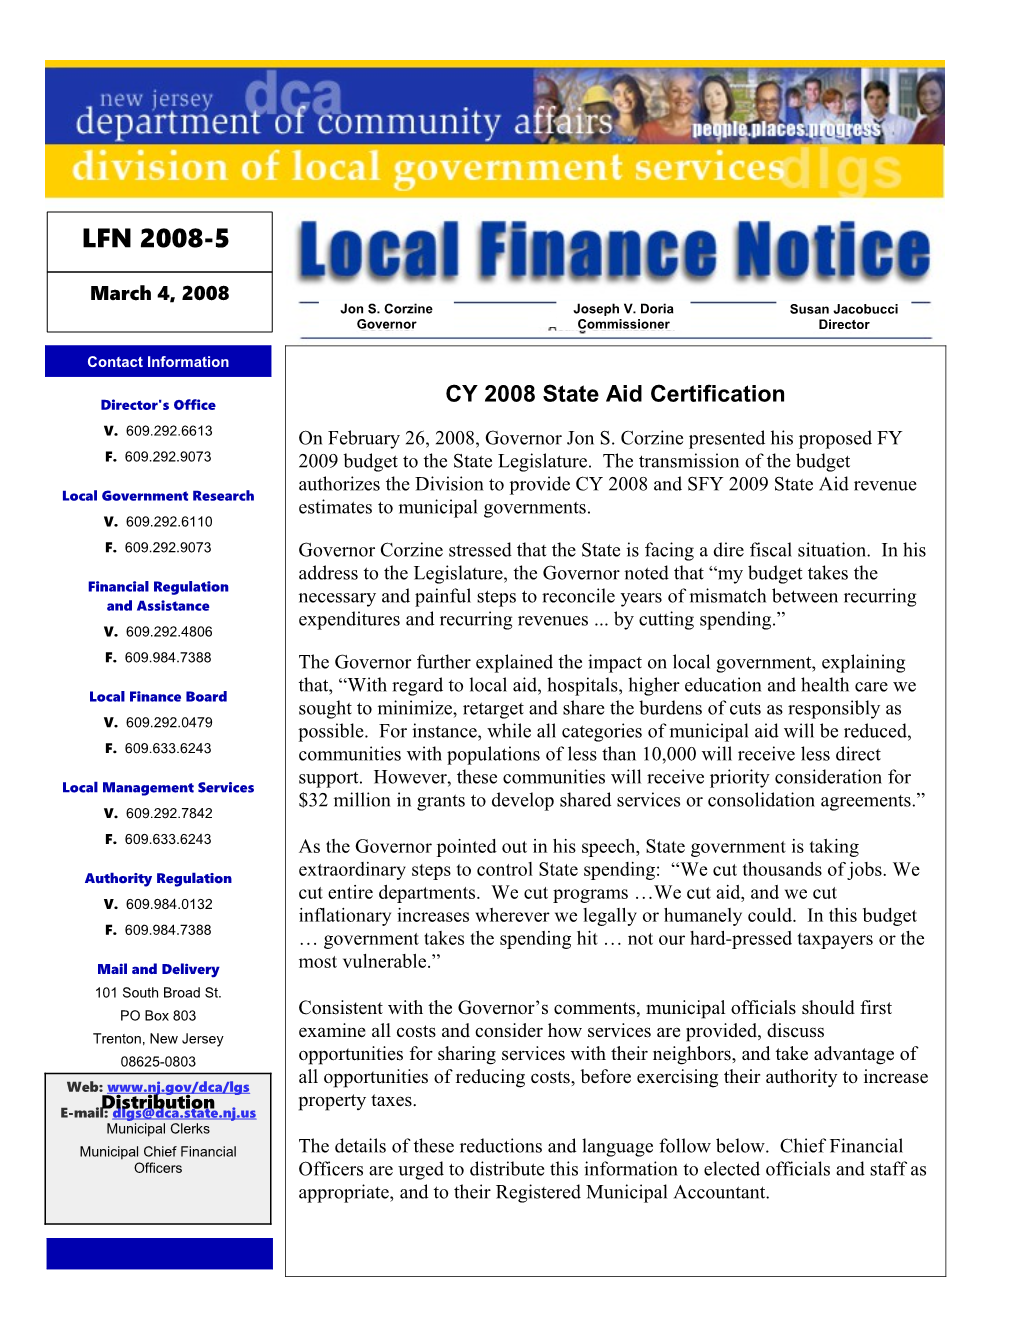 Local Finance Notice 2008-5March 4, 2008Page 1